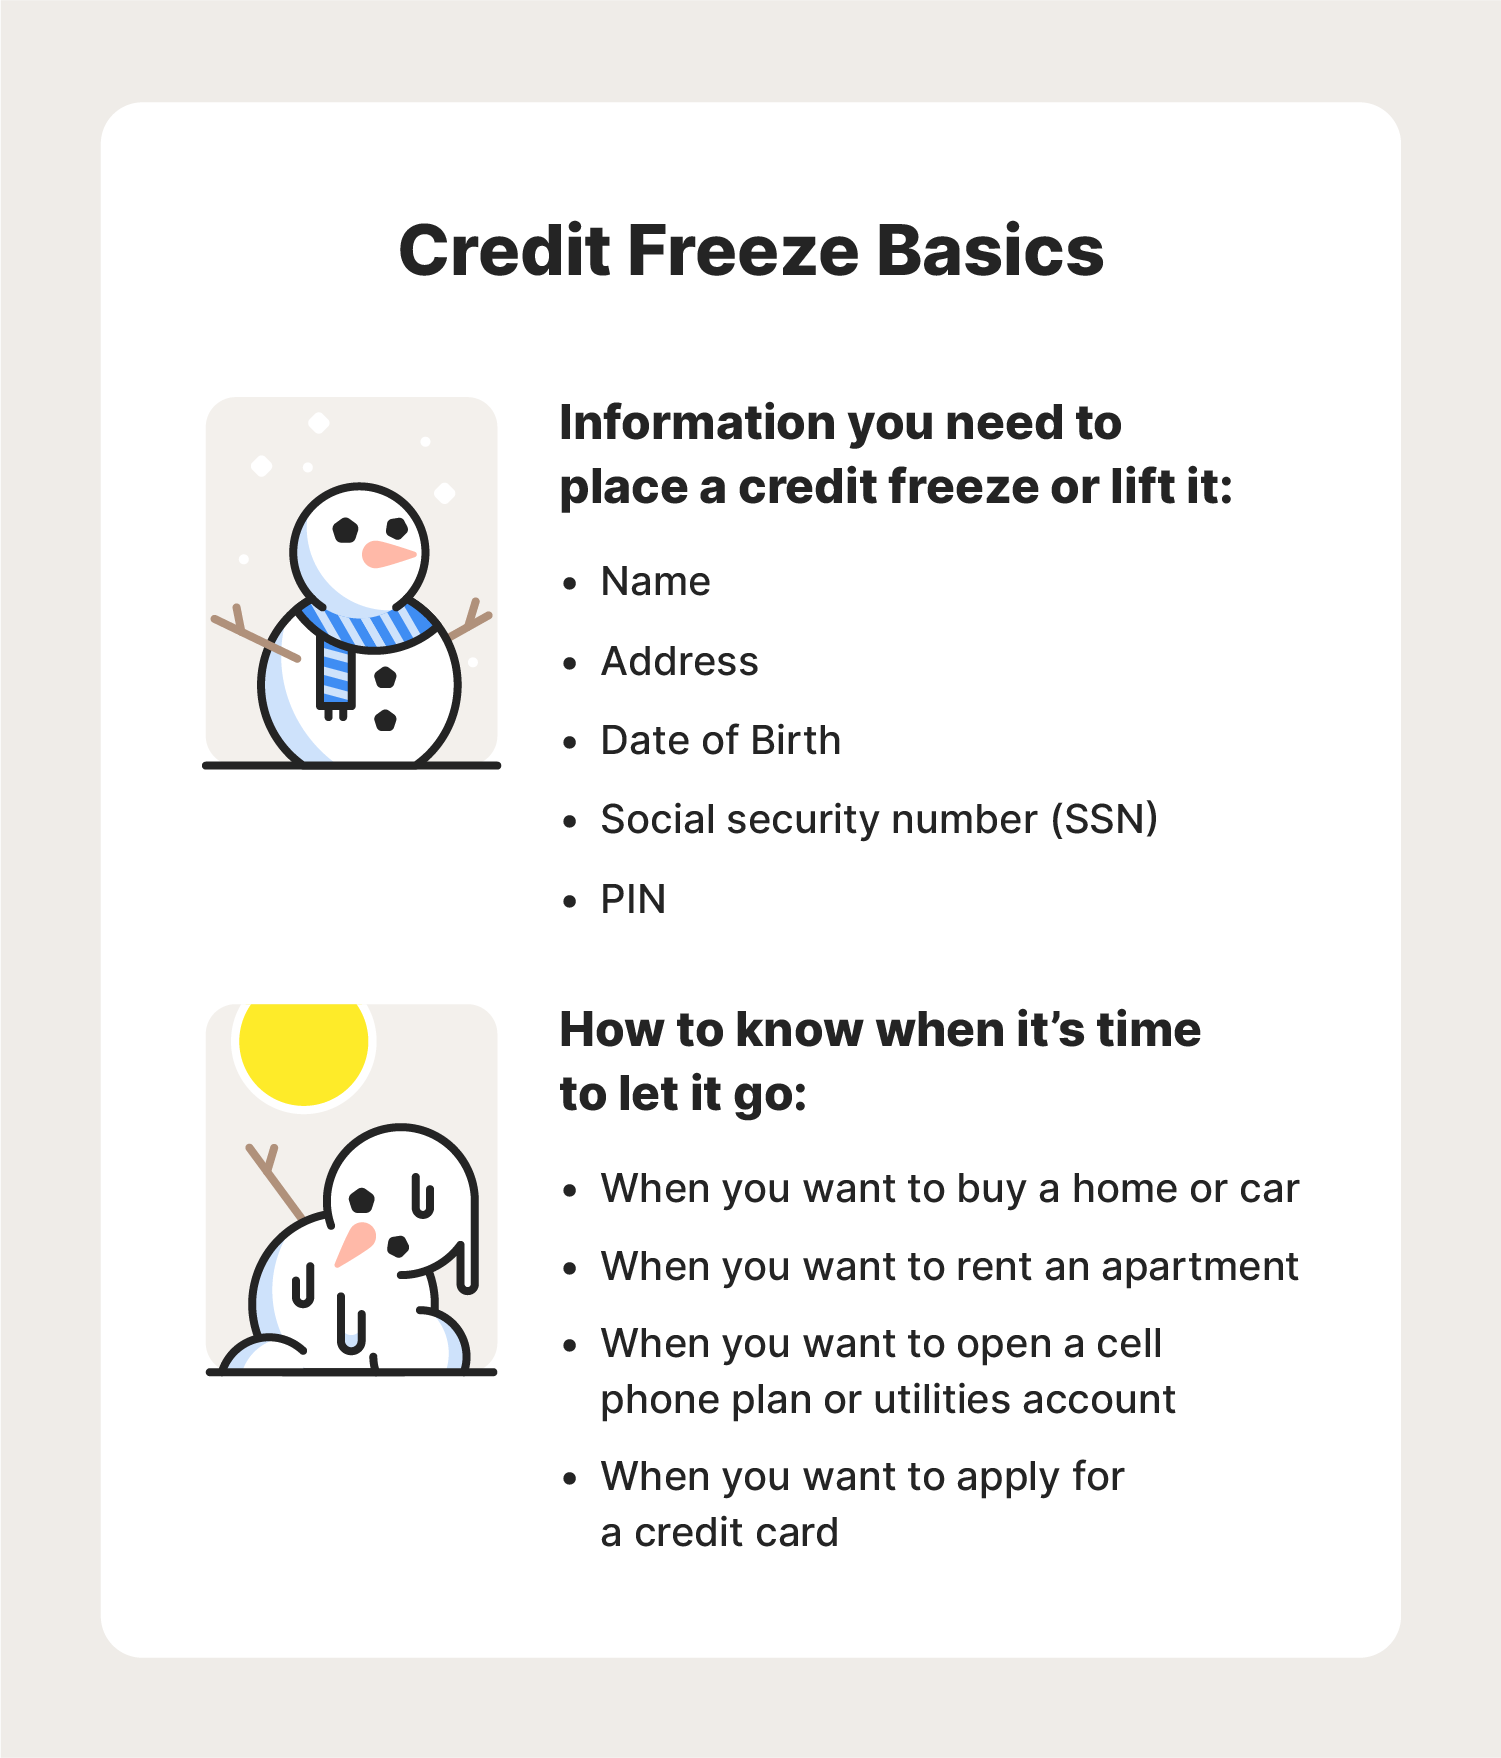 An image covers information you’ll need to implement a credit freeze and common situations when you’d need to lift the credit freeze.